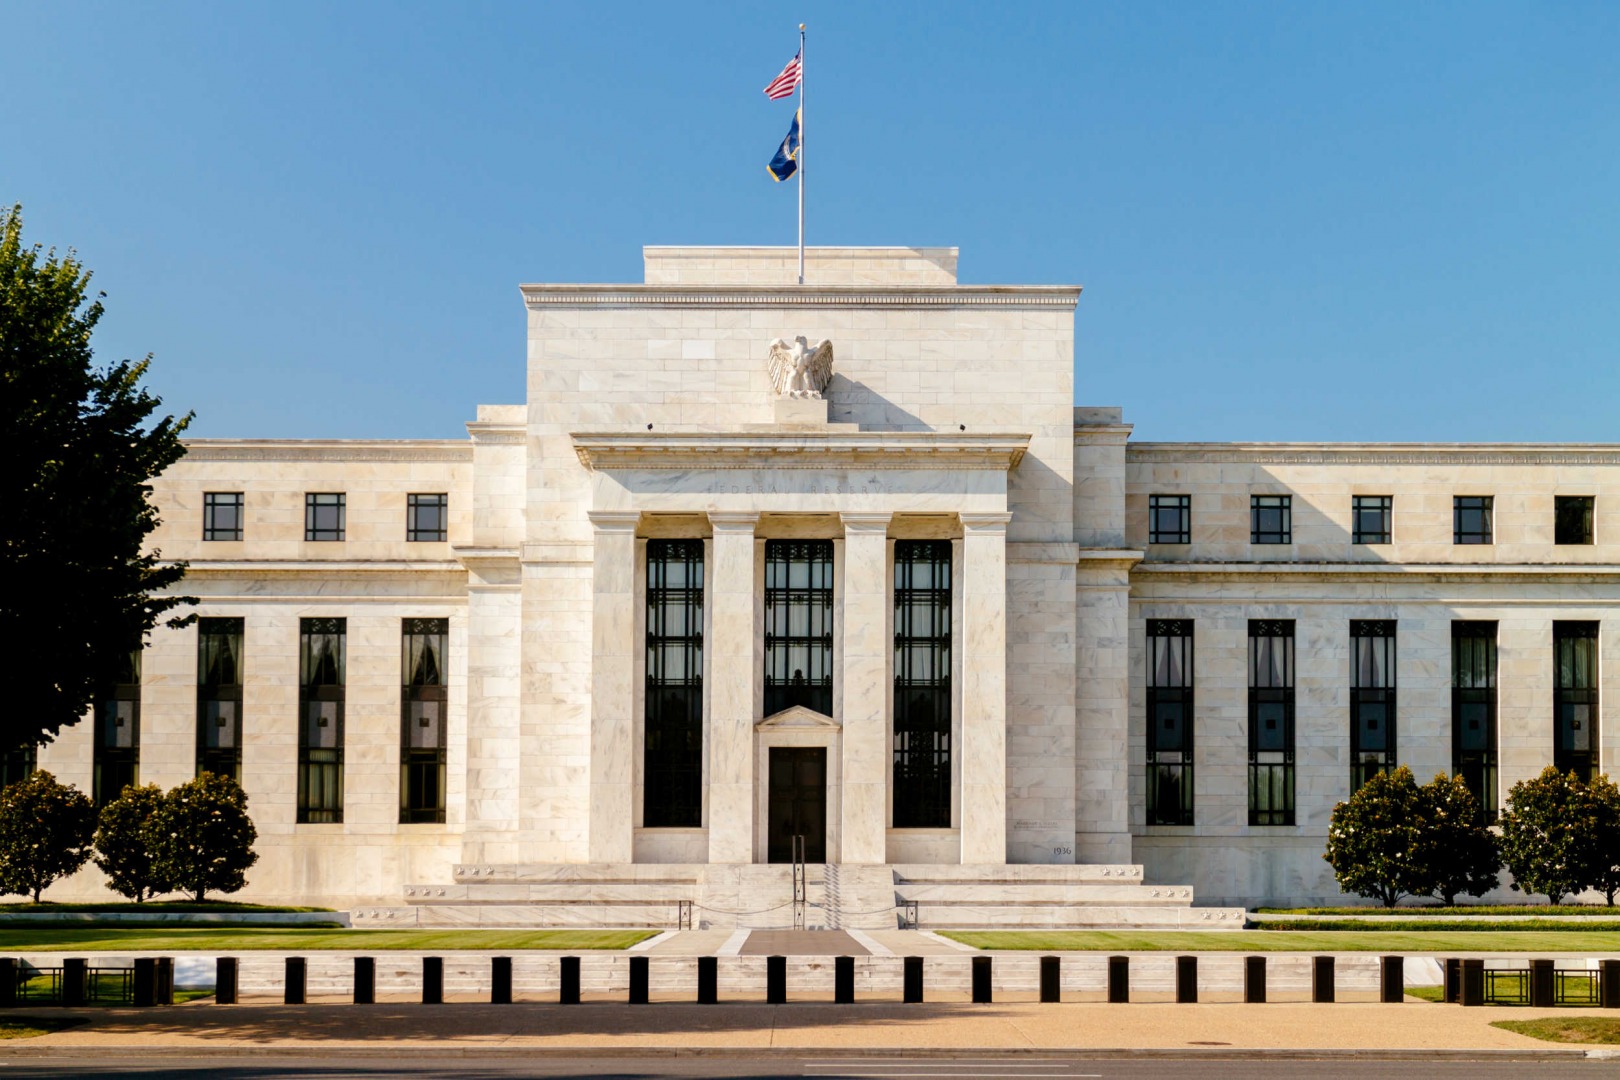 How Should Low Interest Rates Alter Our View of Fiscal Policy?